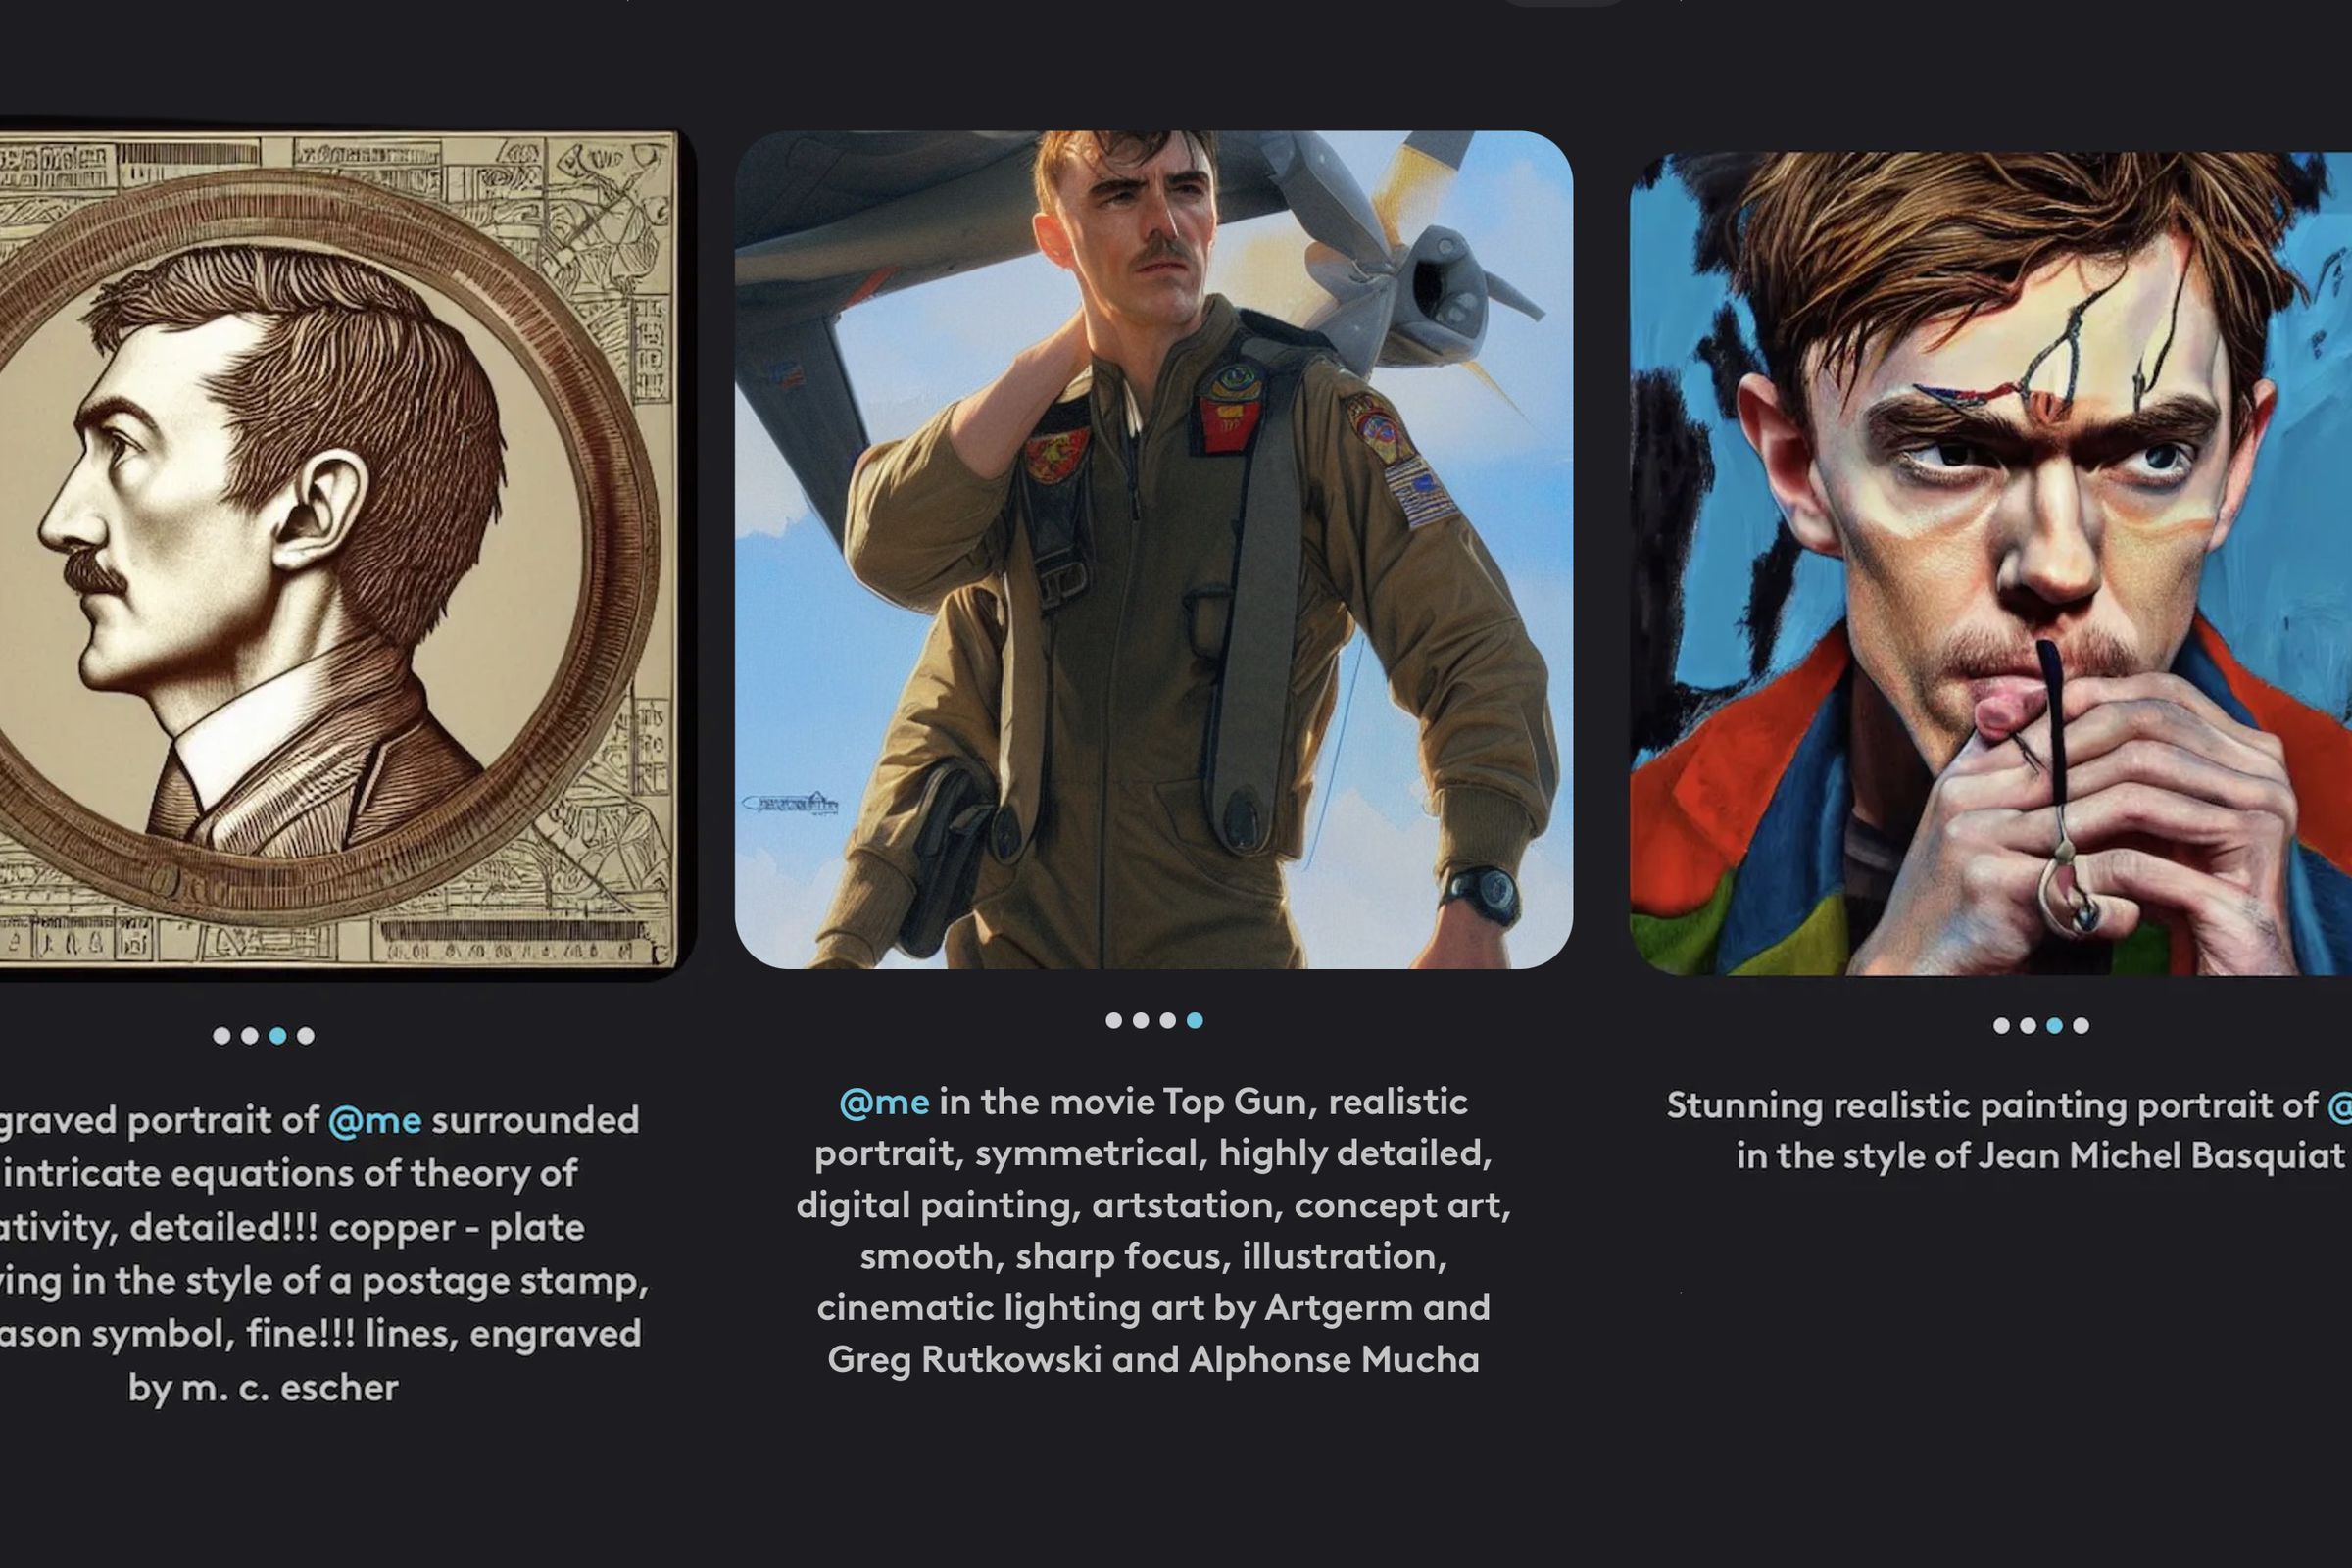 A trio of digital paintings of the same man in different styles, of M.C. Escher, the Top Gun movie, and Jean-Michel Basquiat.